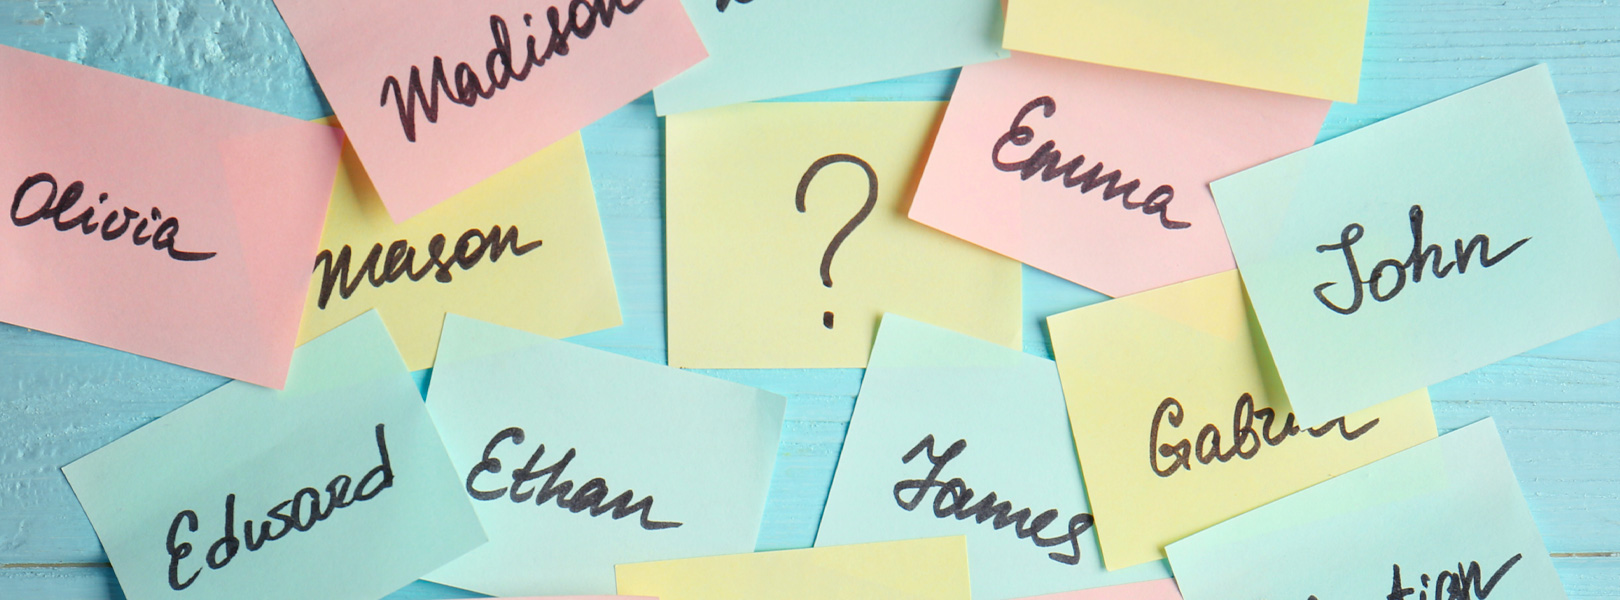 Choosing a baby name. Colorful post-its with possibilities.